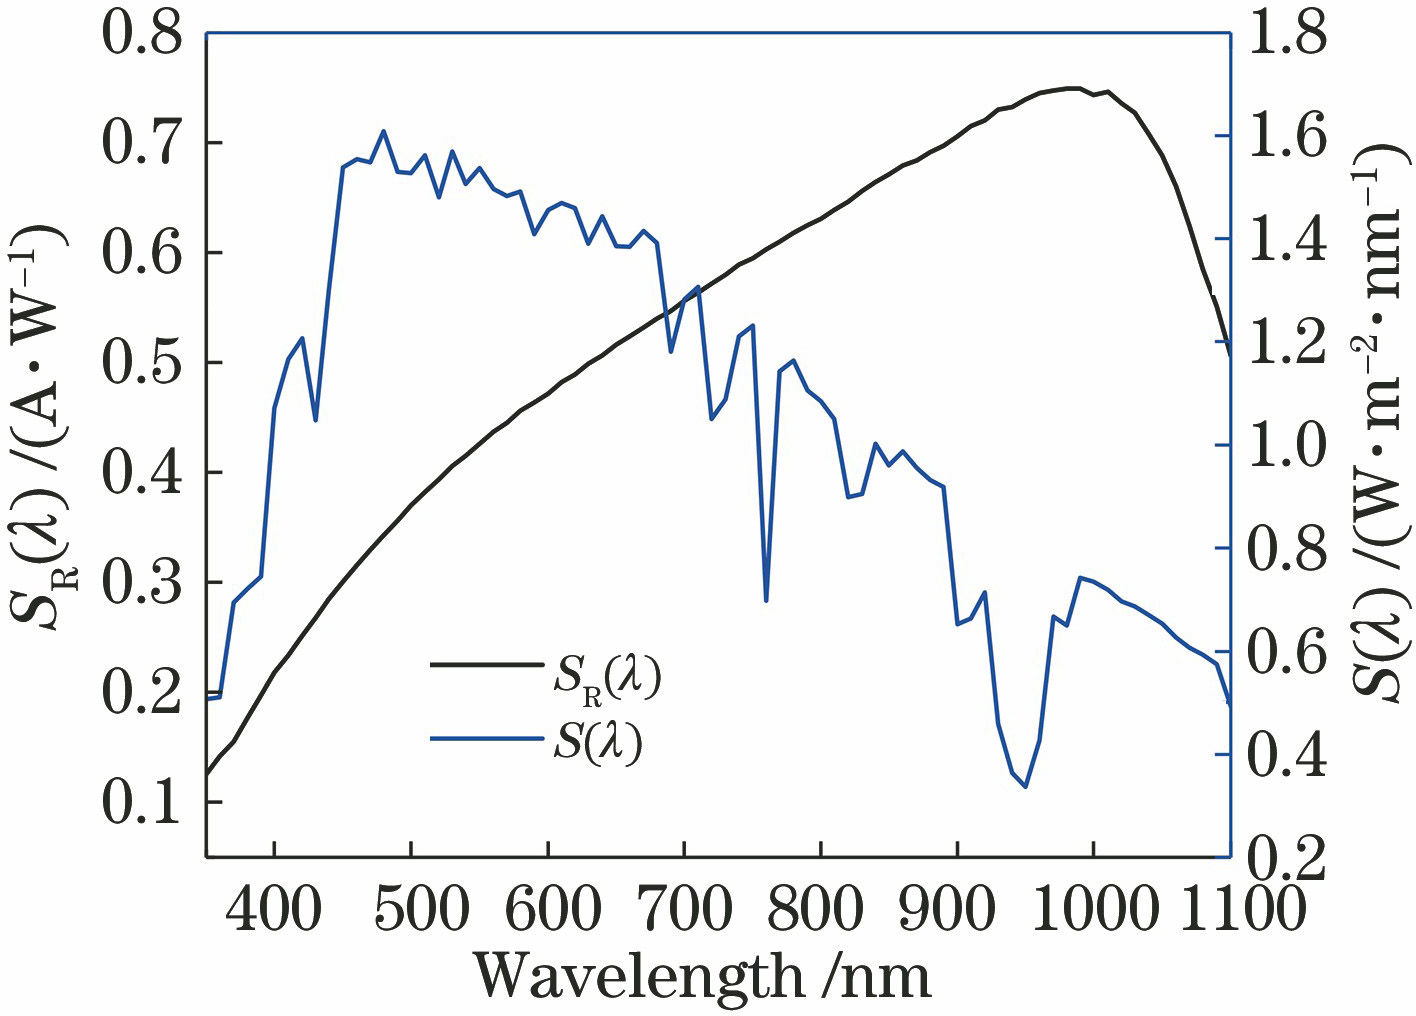 AM1.5 solar spectrum and spectral response characteristic curves of crystalline silicon solar cell